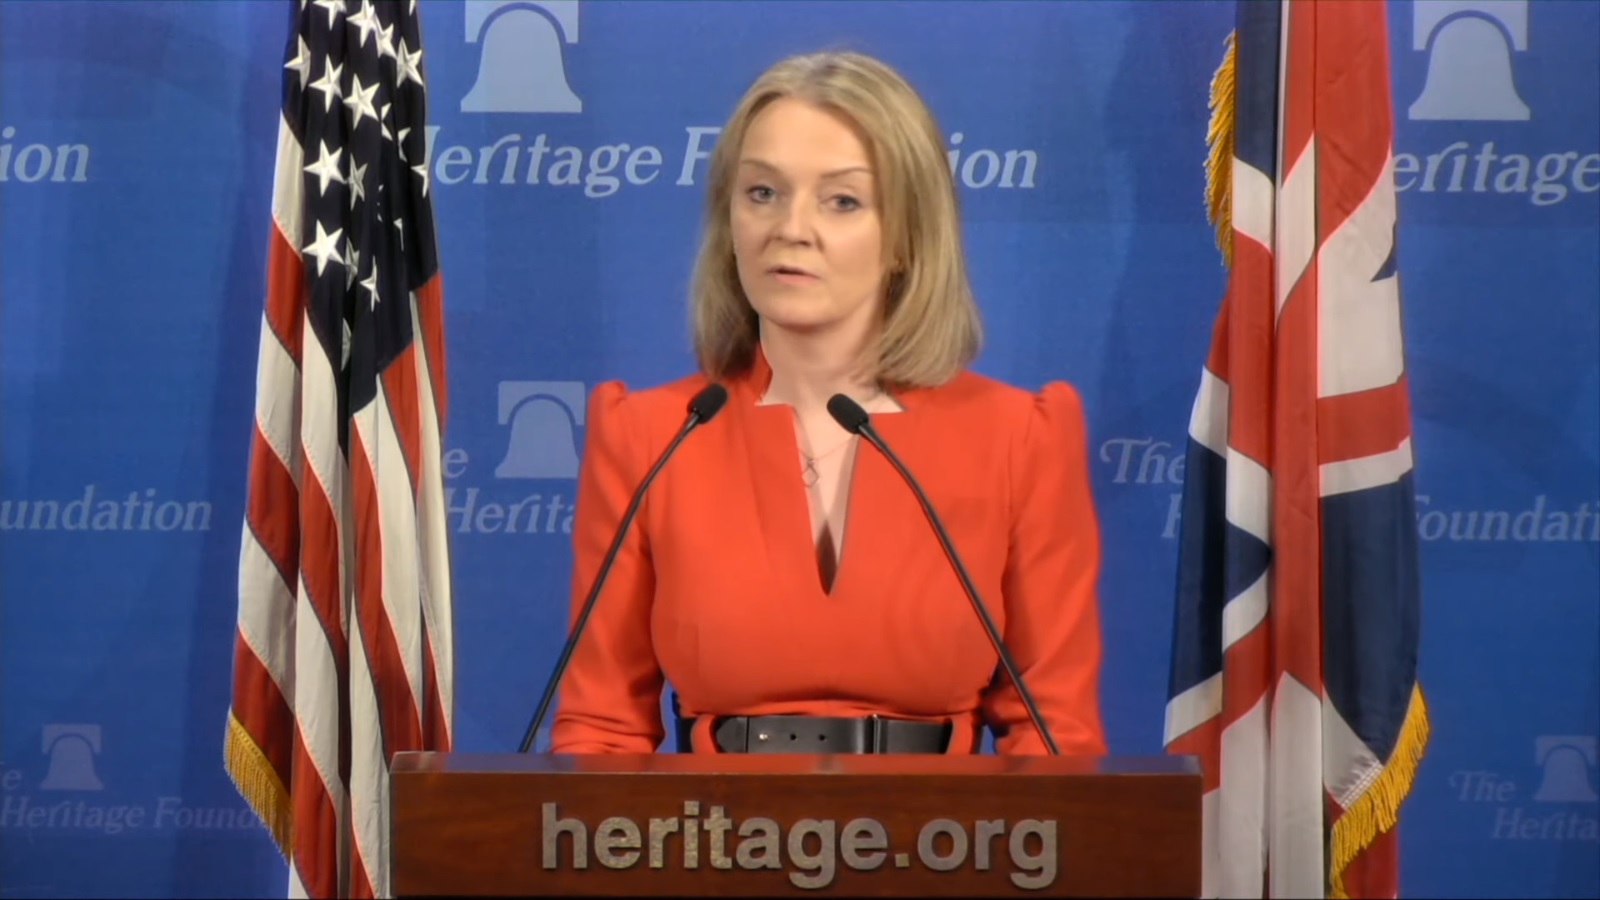 Liz Truss lavished praise on the Heritage Foundation, the US conservative lobbying group that has led efforts to undermine LGBT+ rights.